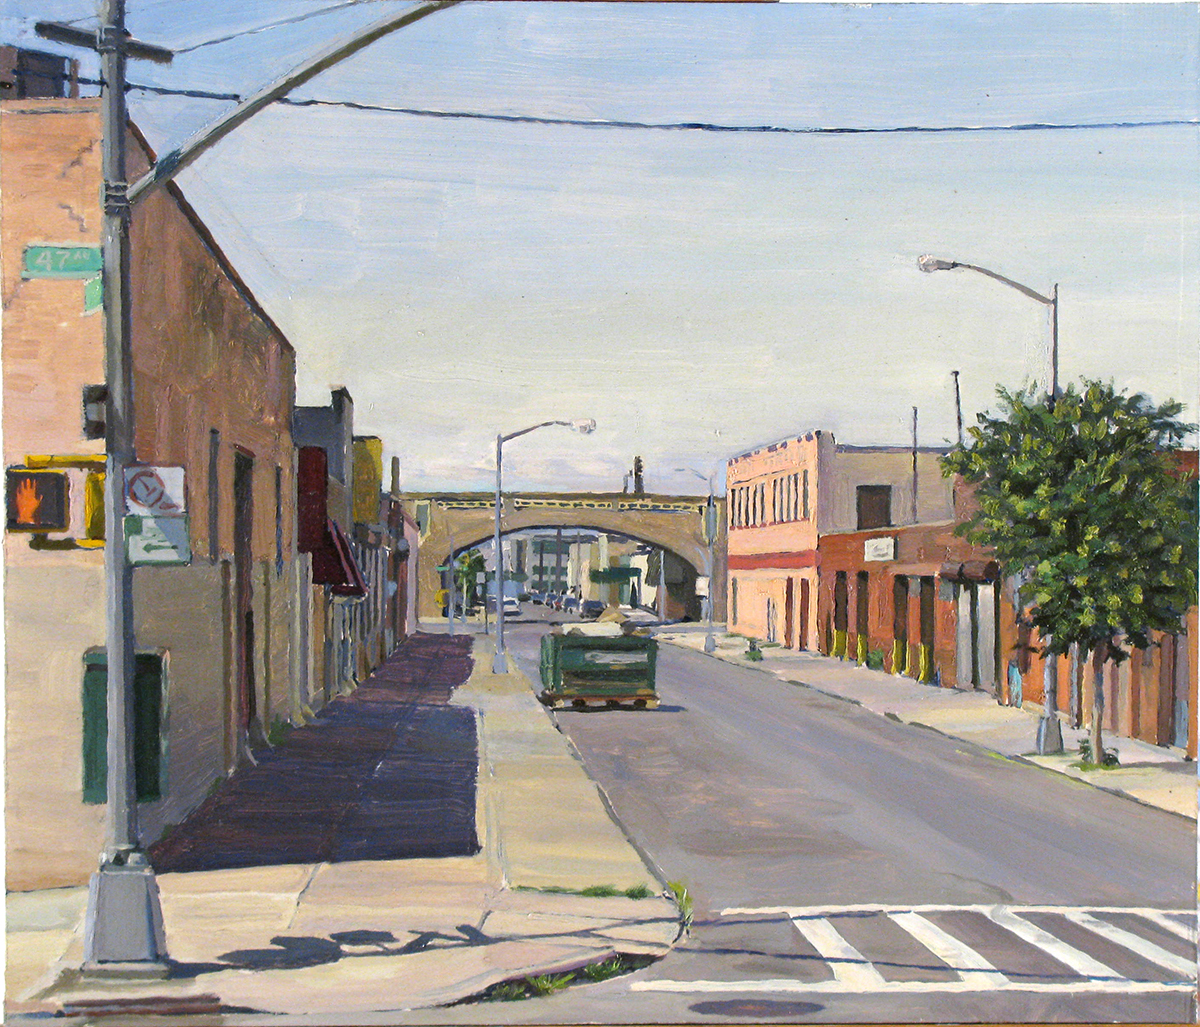  W-21: 39thST. and 47THRD. oil on panel 14 x 16” 2009 